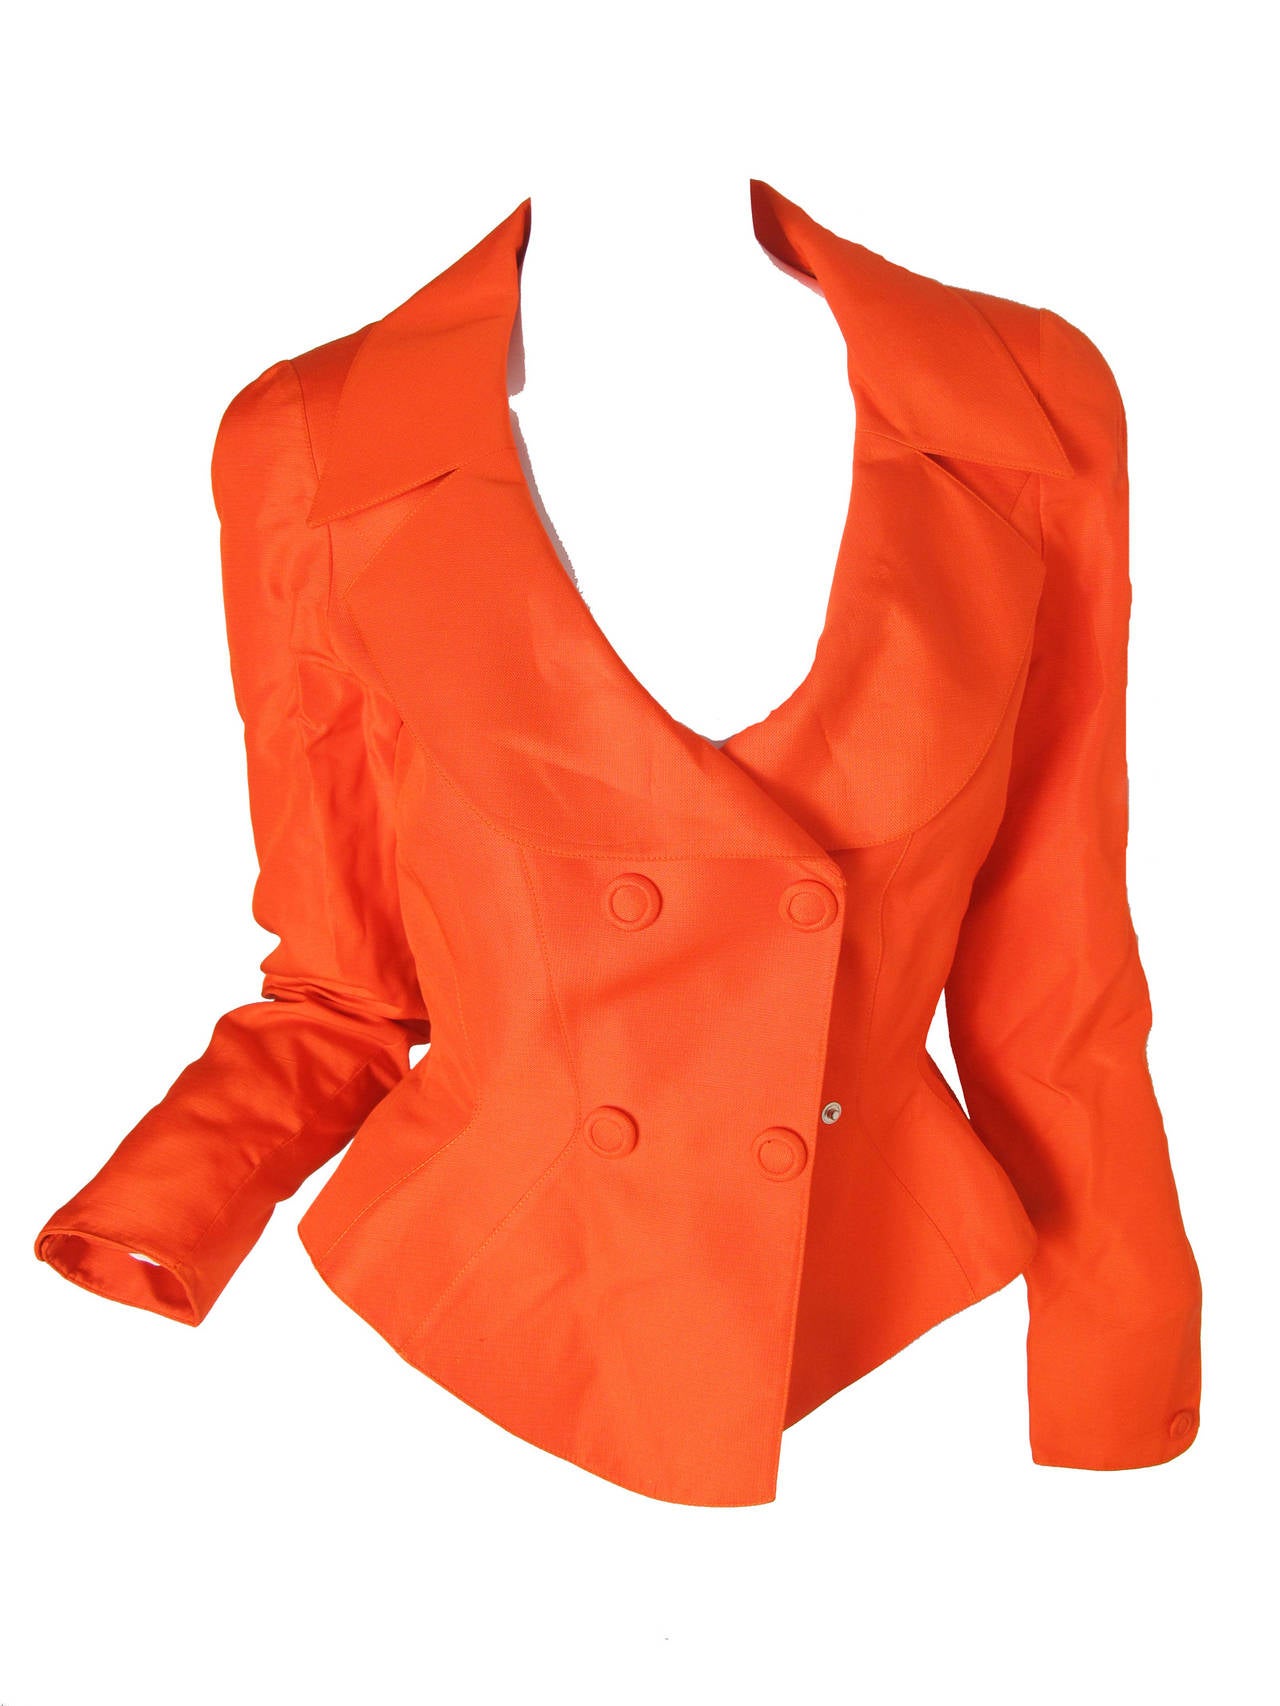 1980s Thierry Mugler orange silk jacket with covered snaps, fitted waist and mini skirt.  
Skirt: 23 1/2